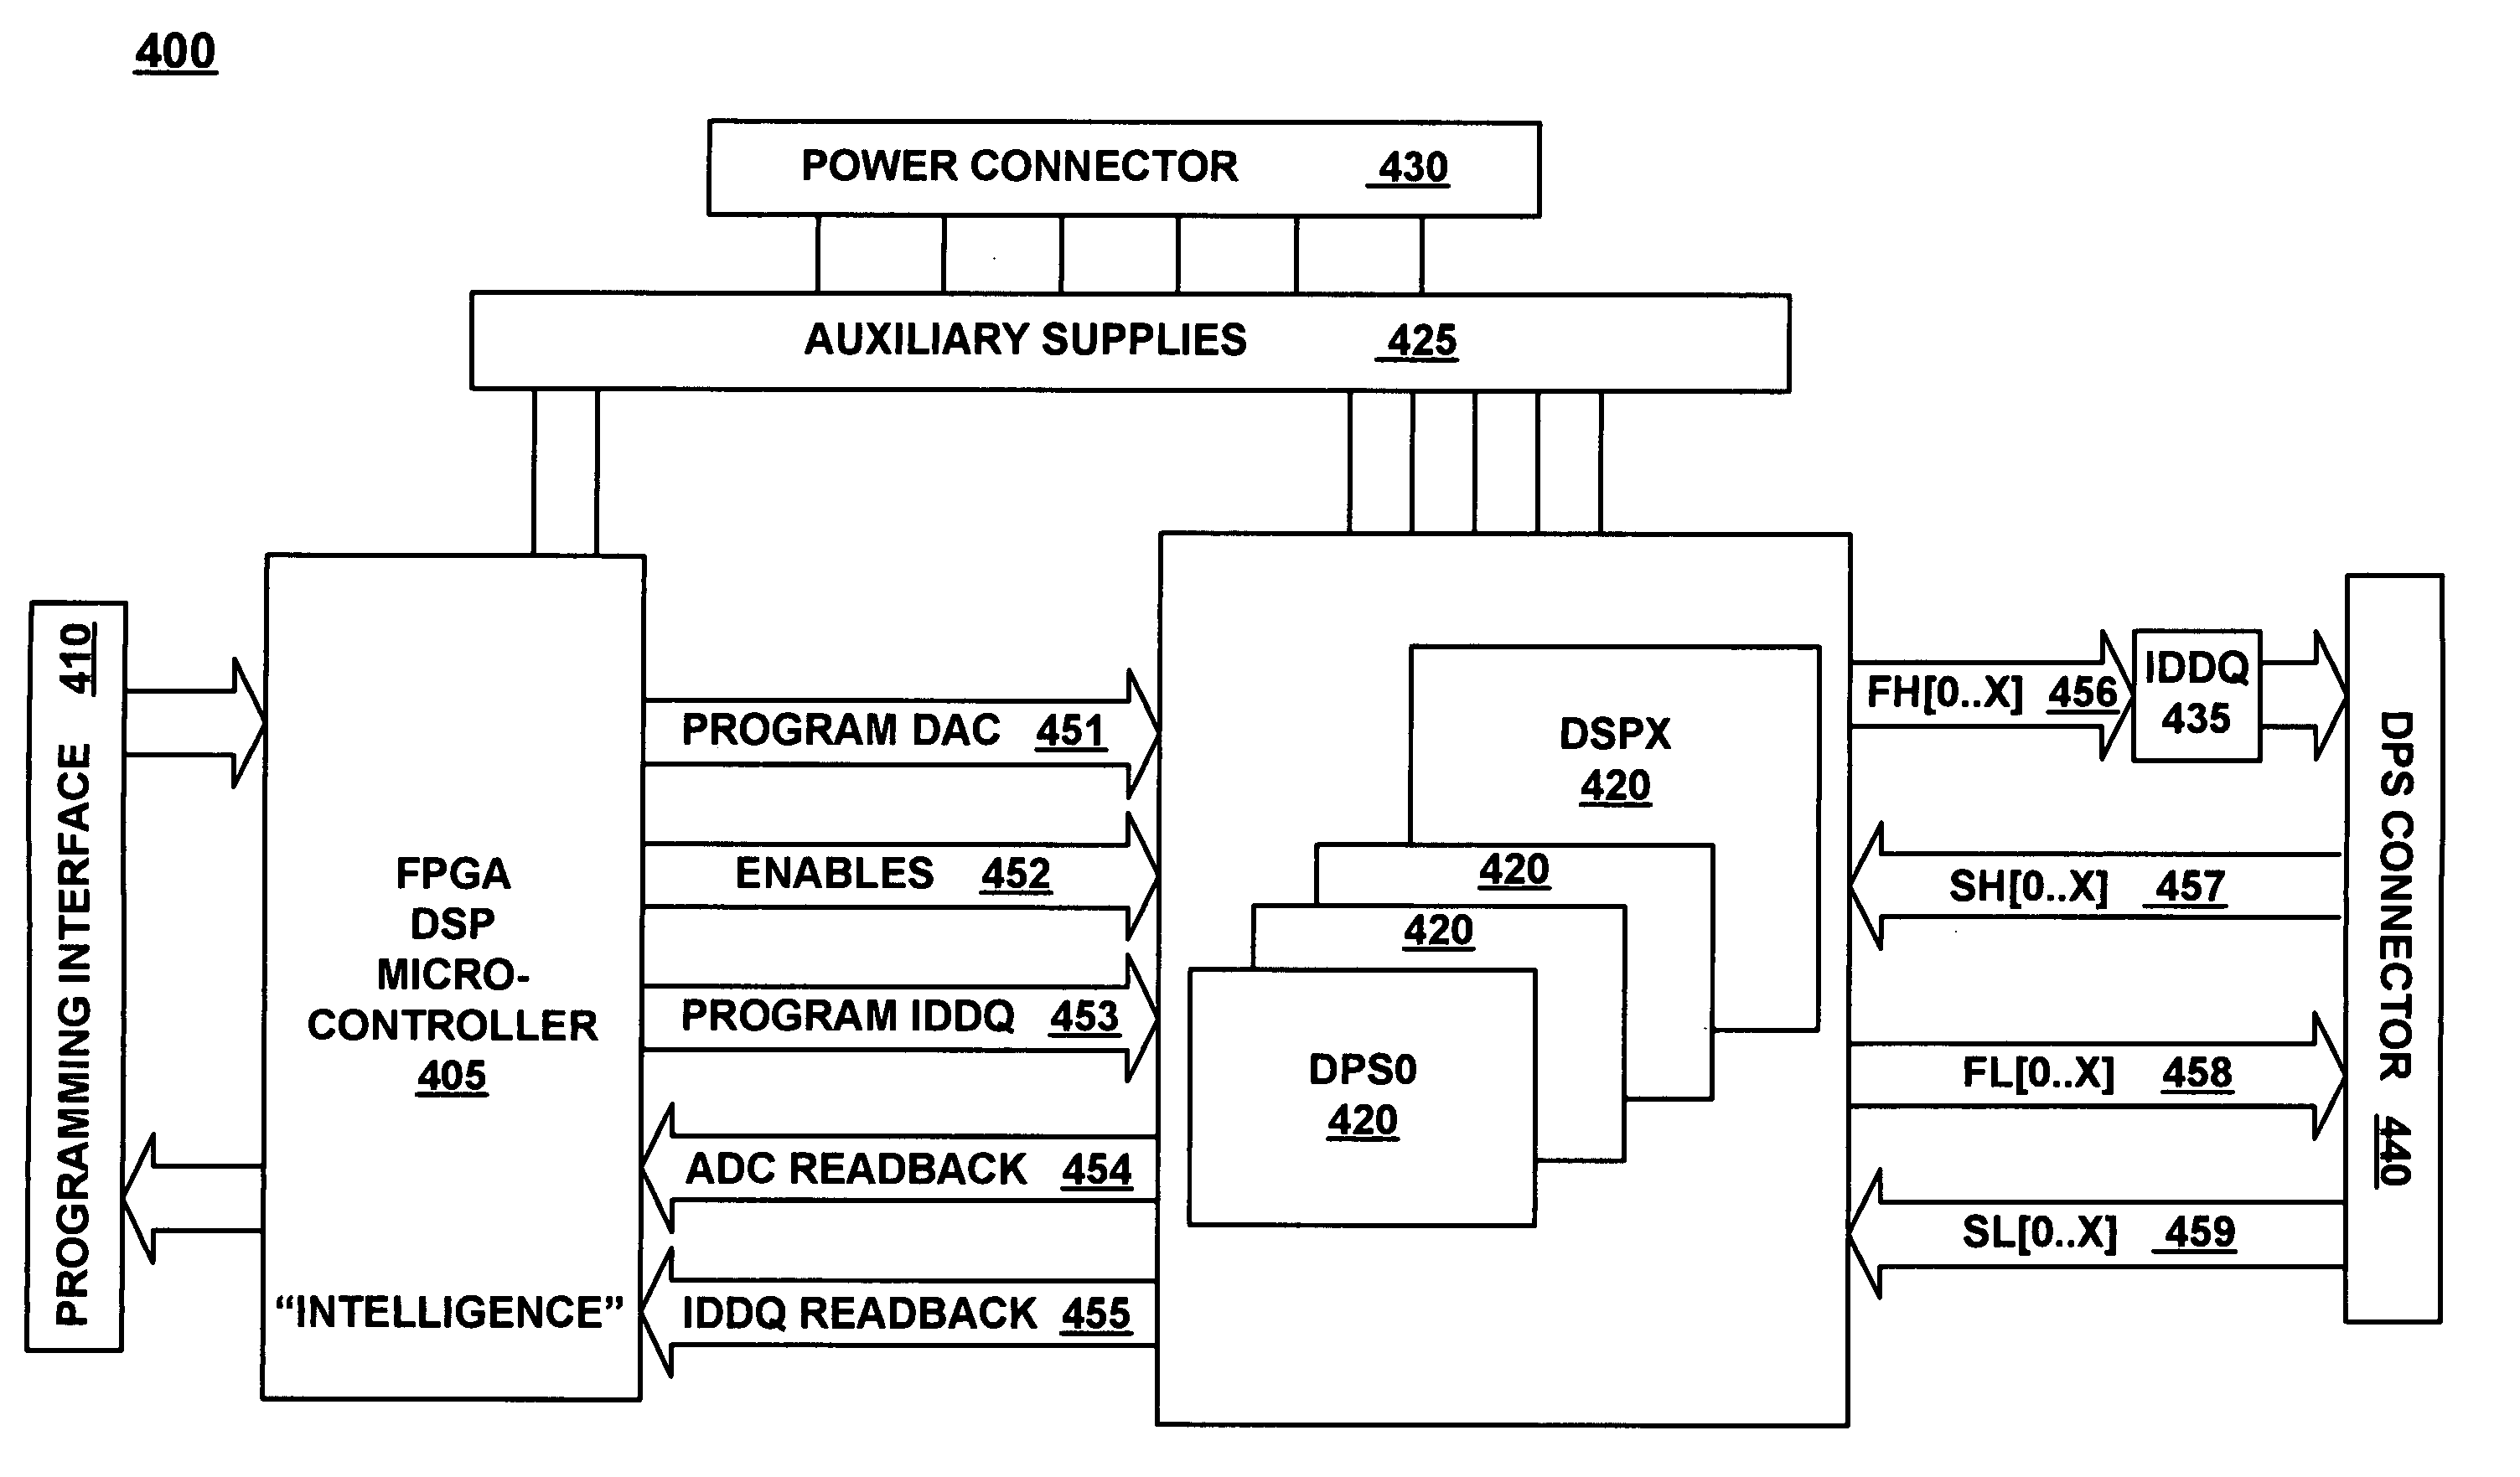 Digitally controlled modular power supply for automated test equipment